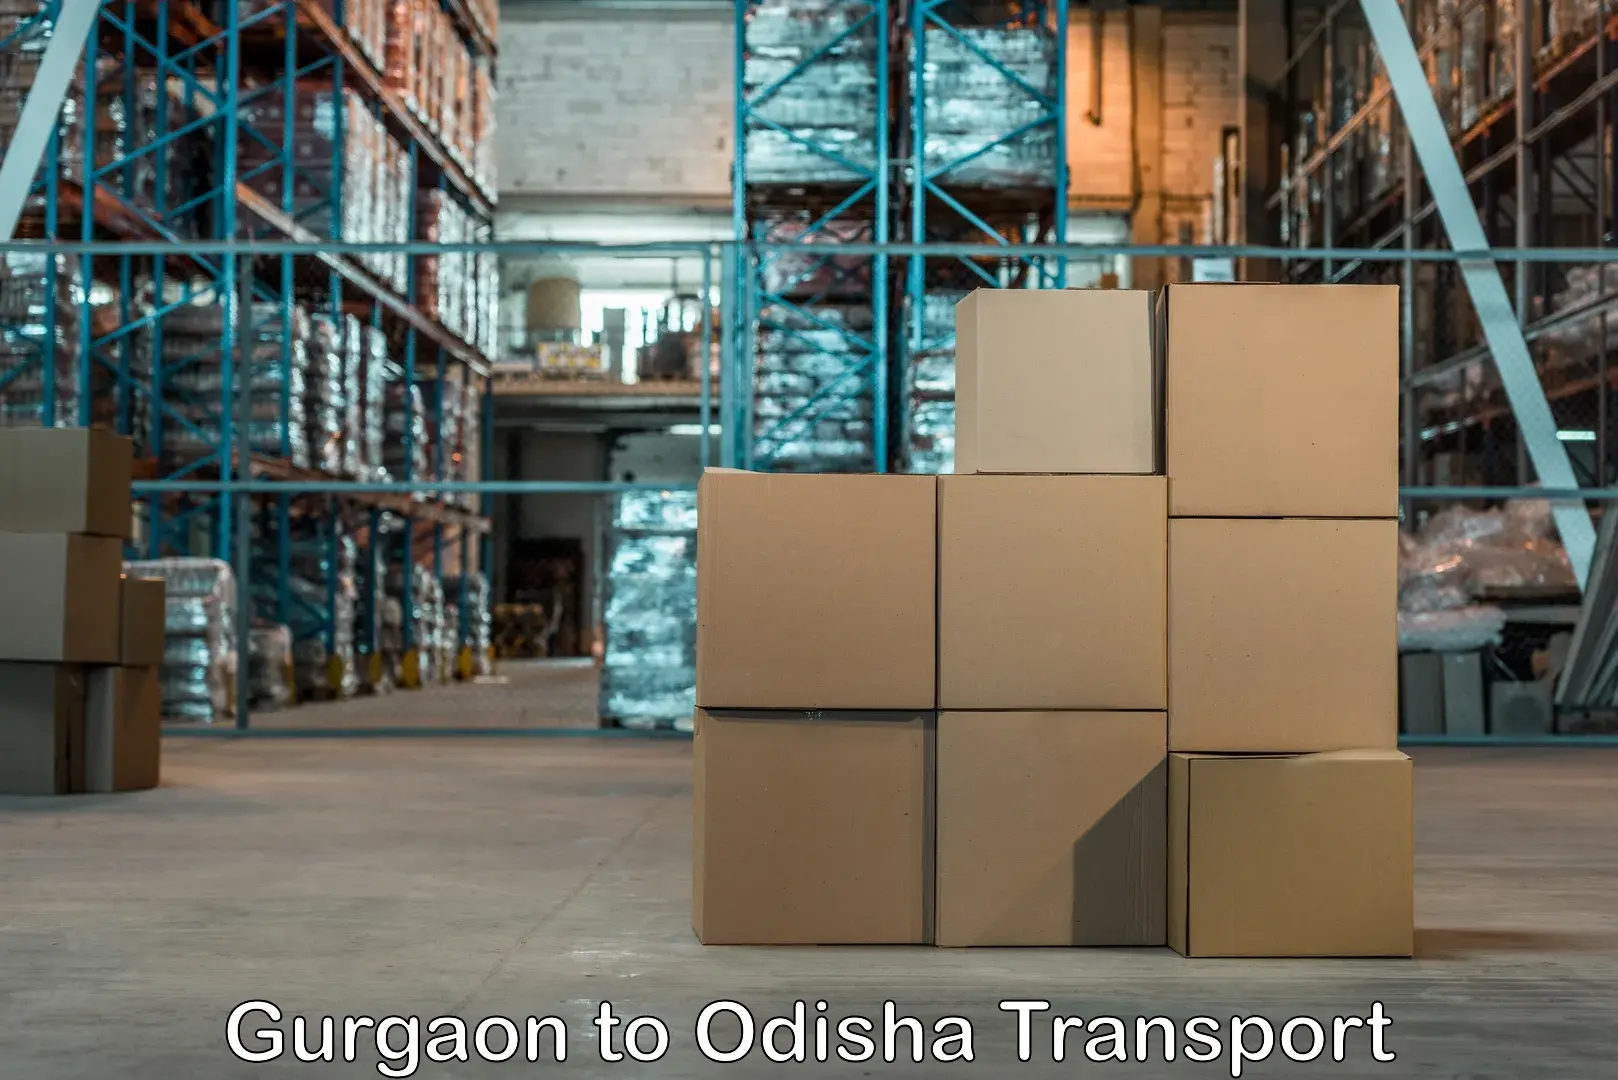 Transport shared services in Gurgaon to Odisha